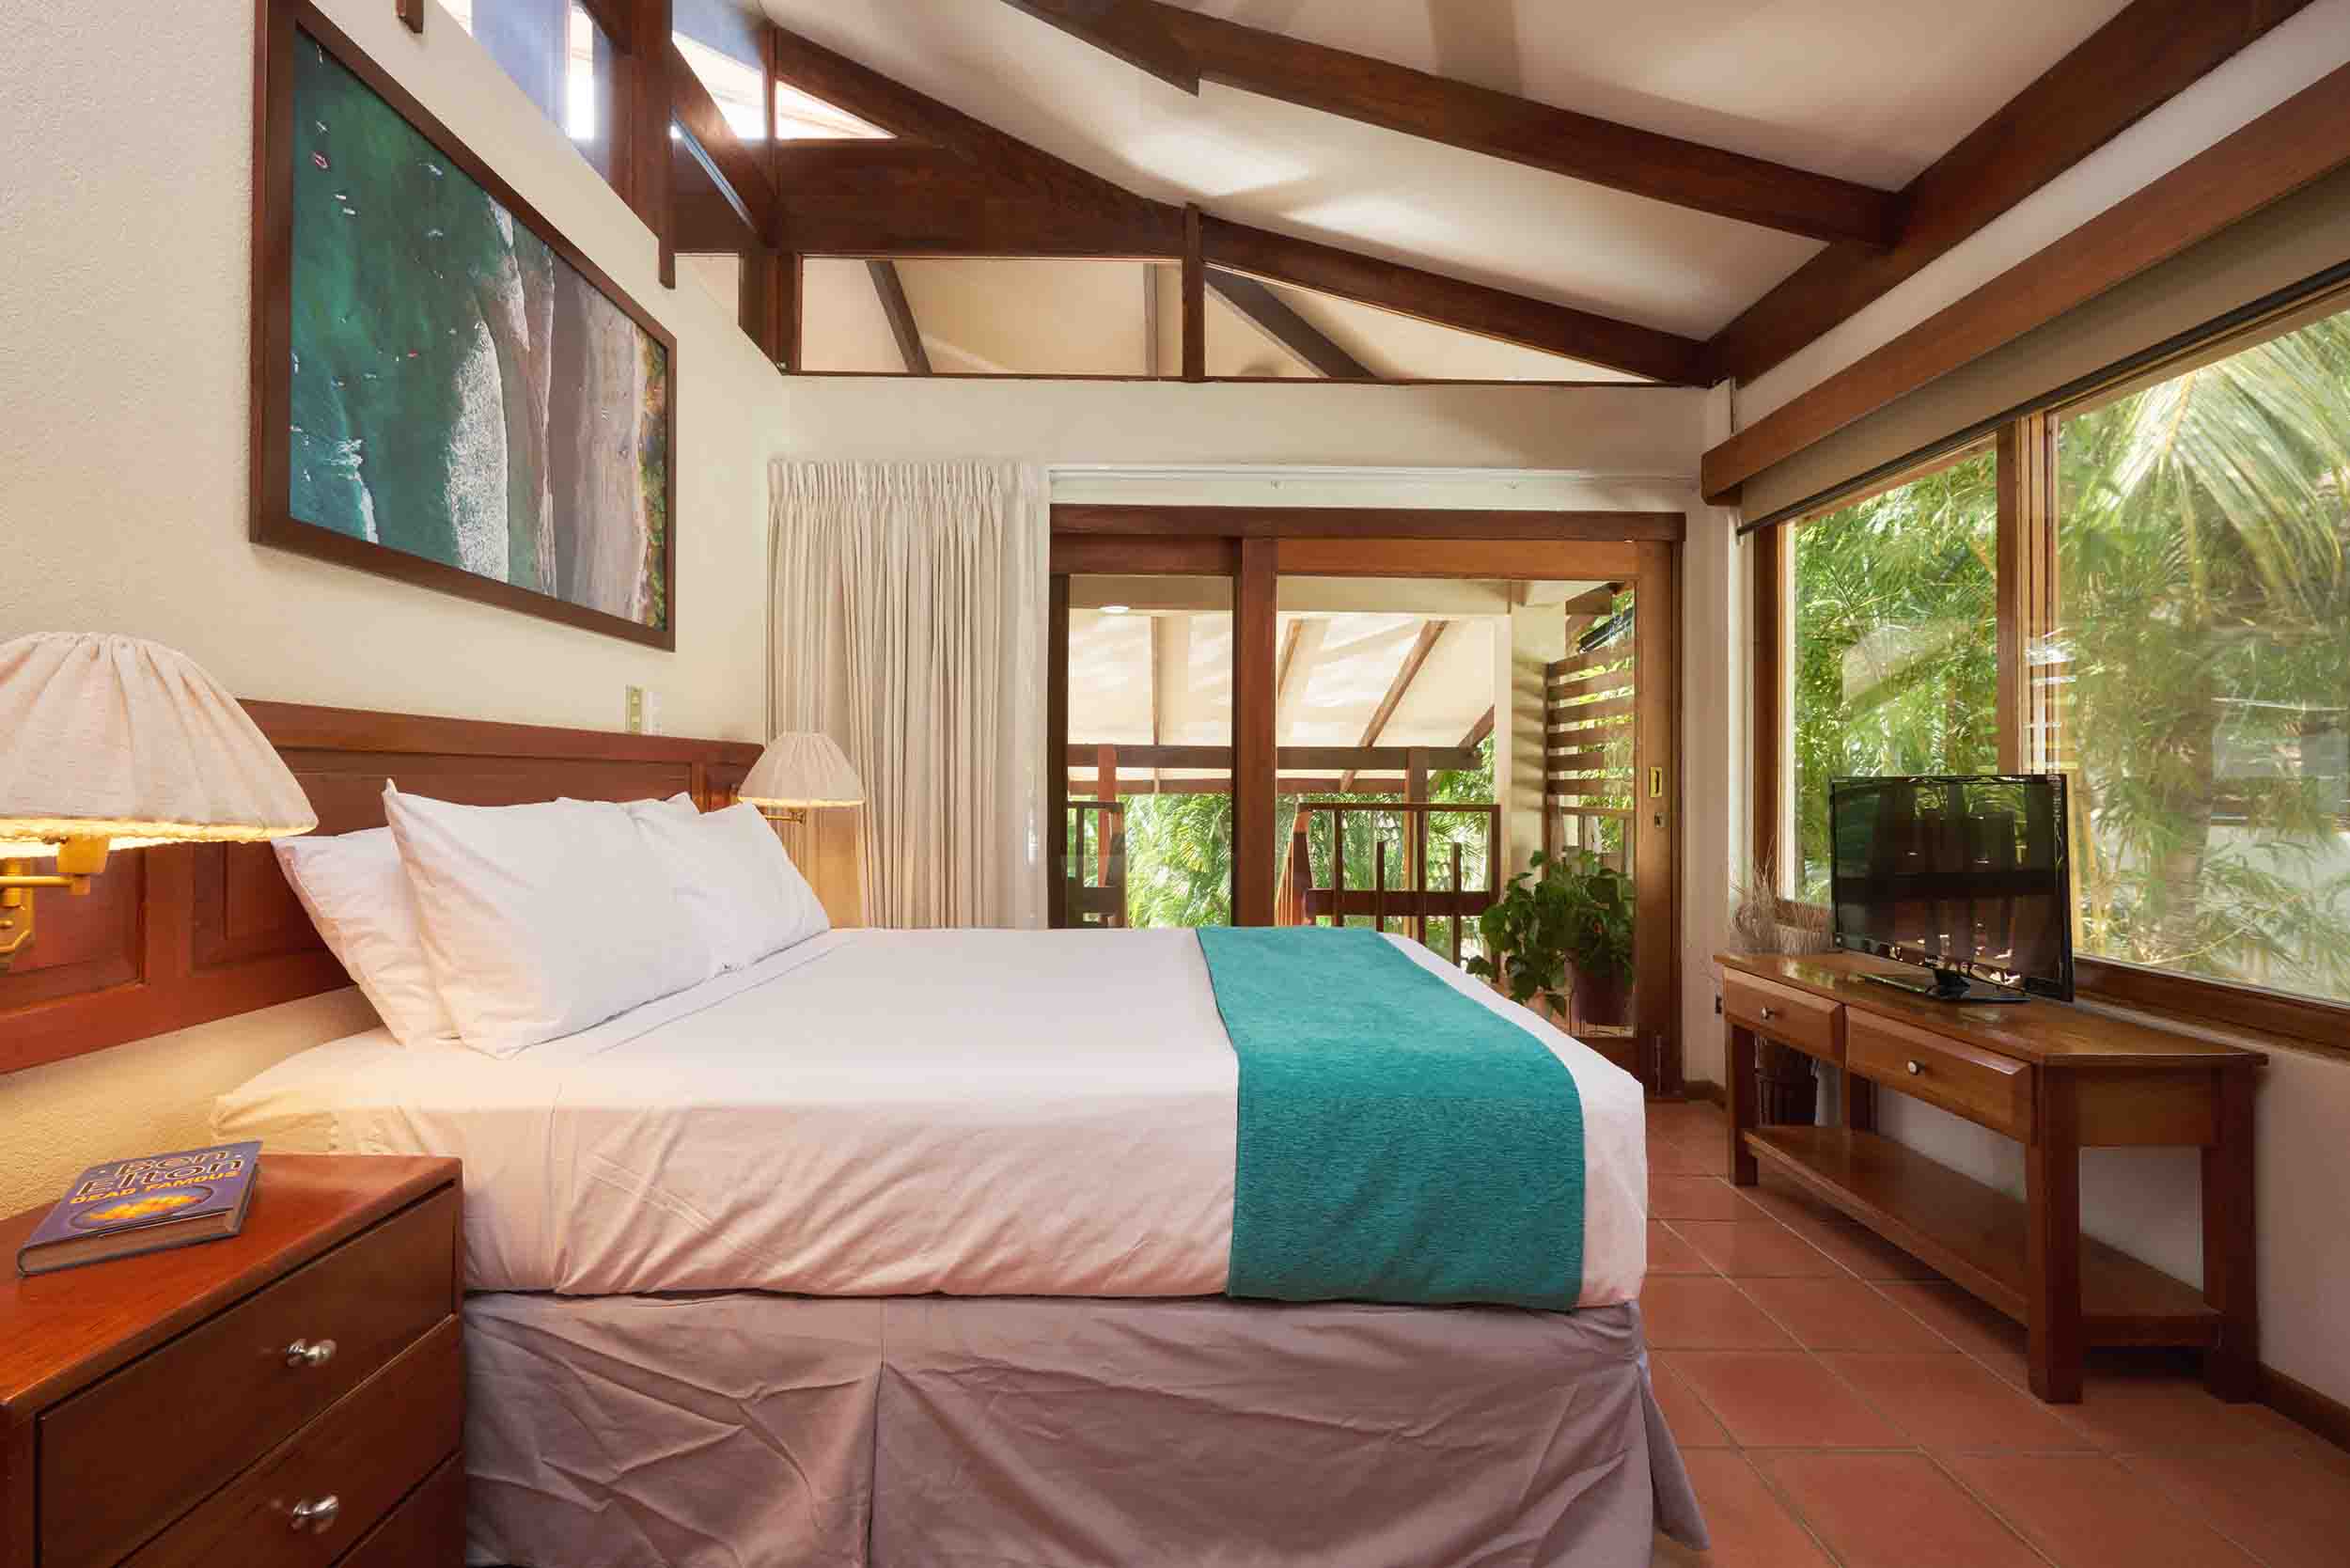 View of the bedroom in the Villa room